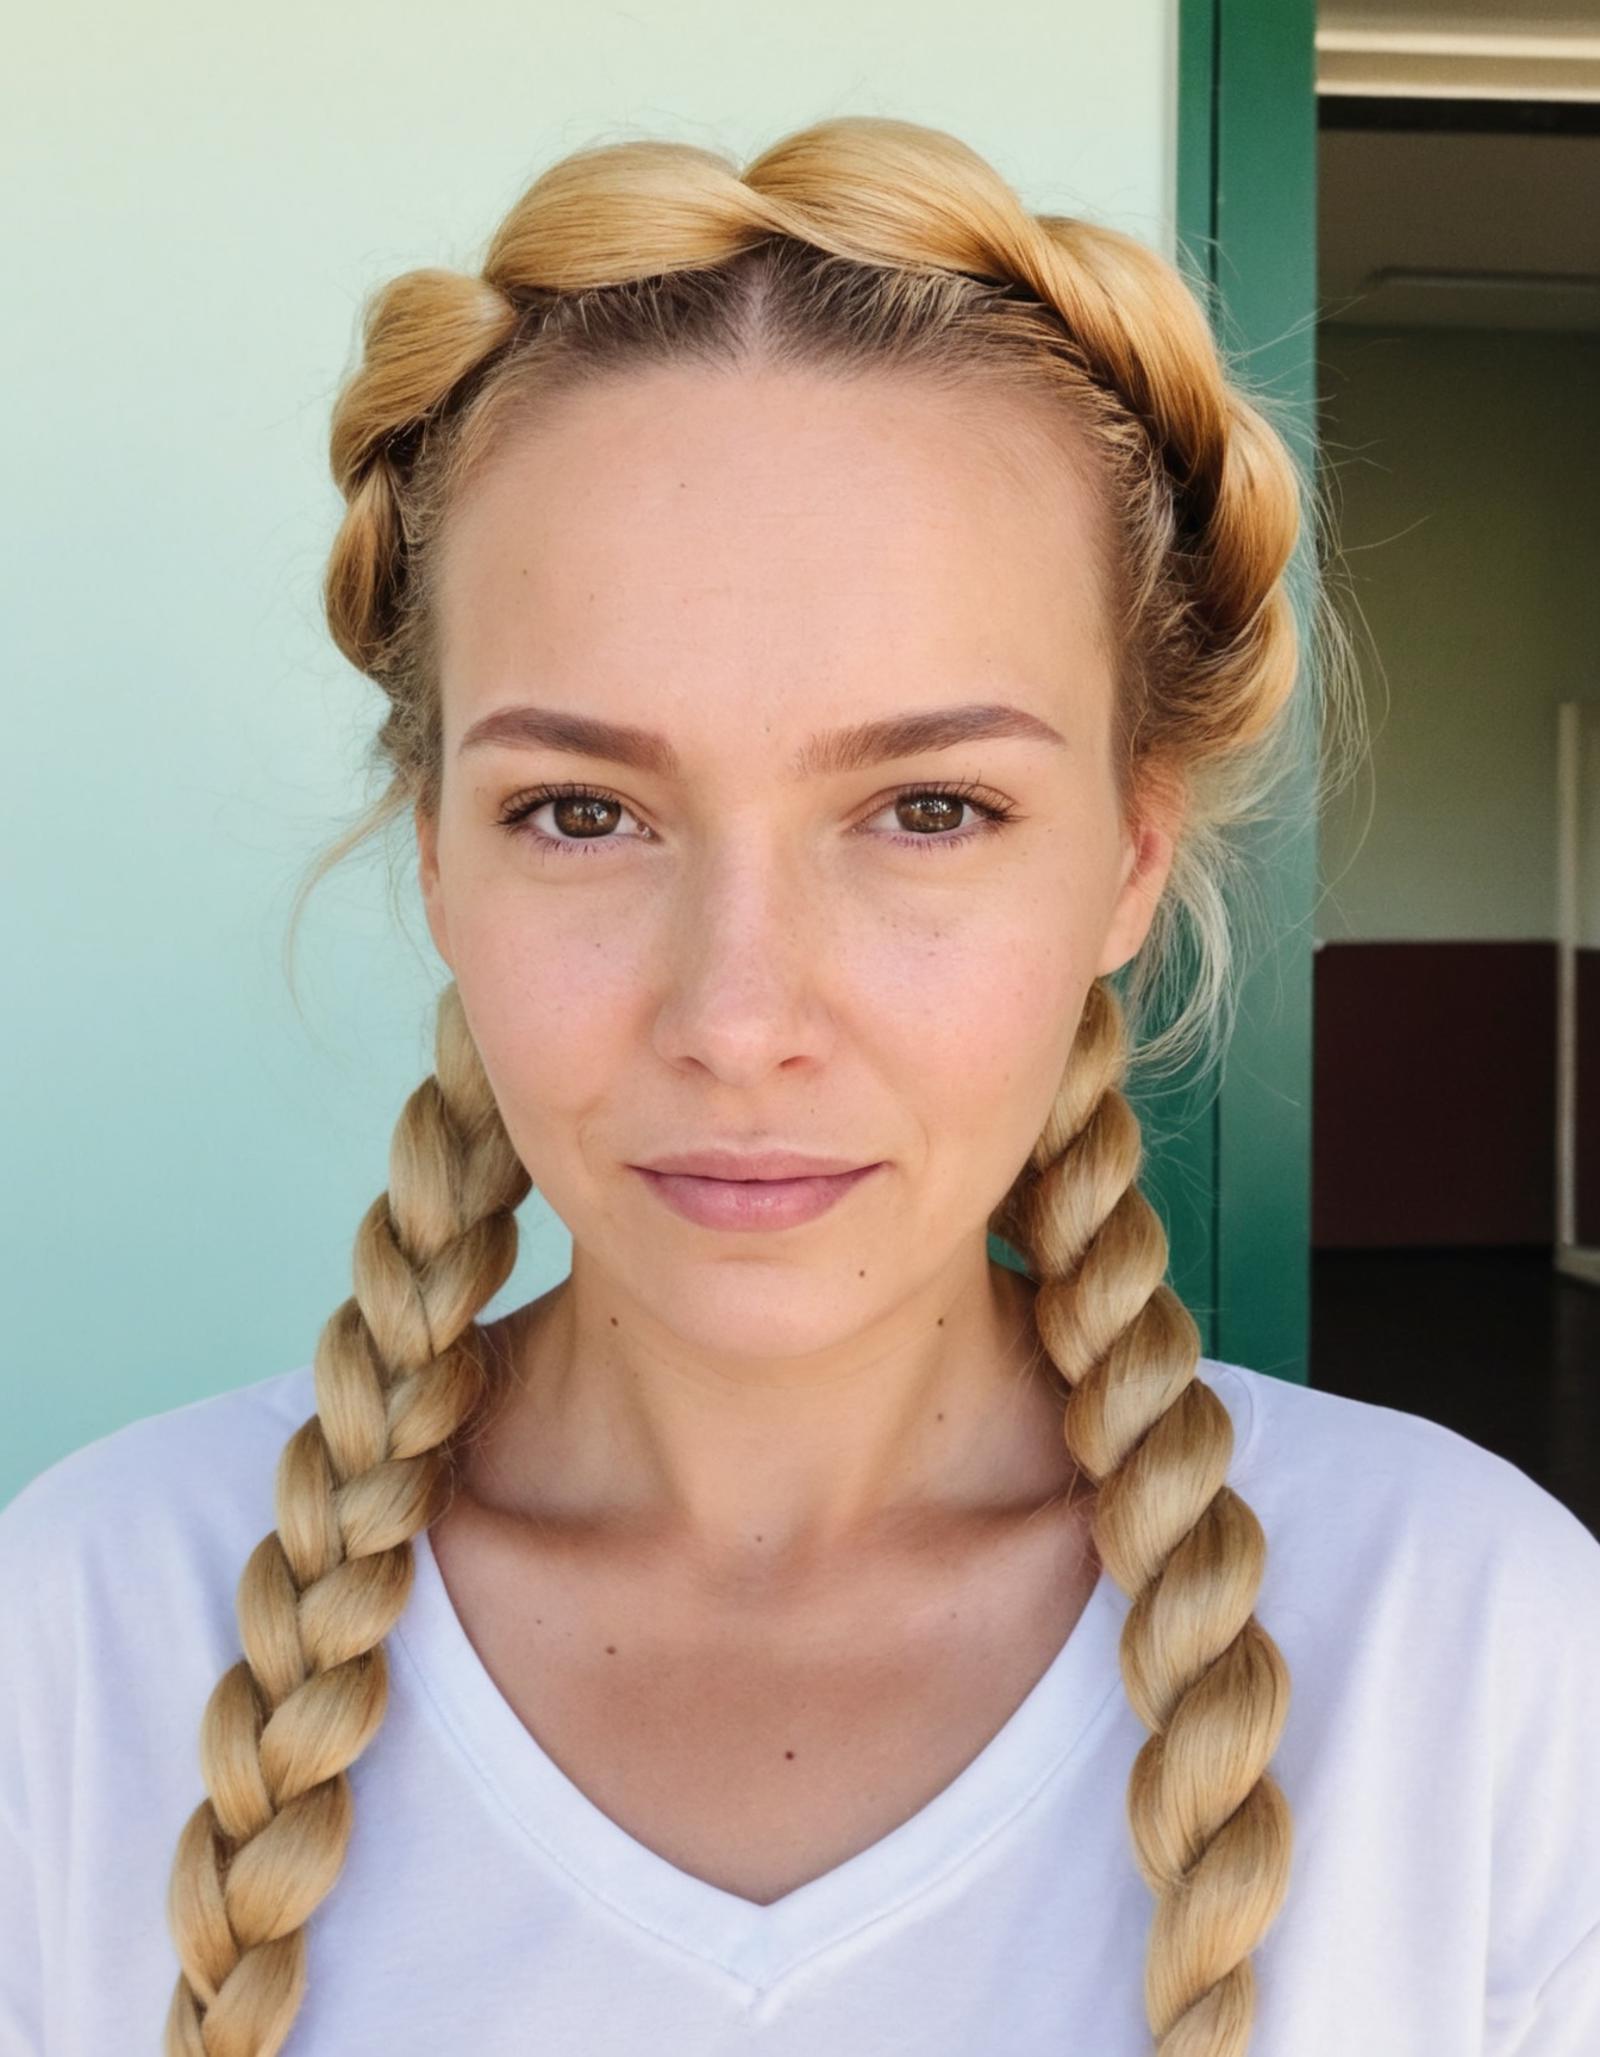 A woman with blonde braids looking at the camera.